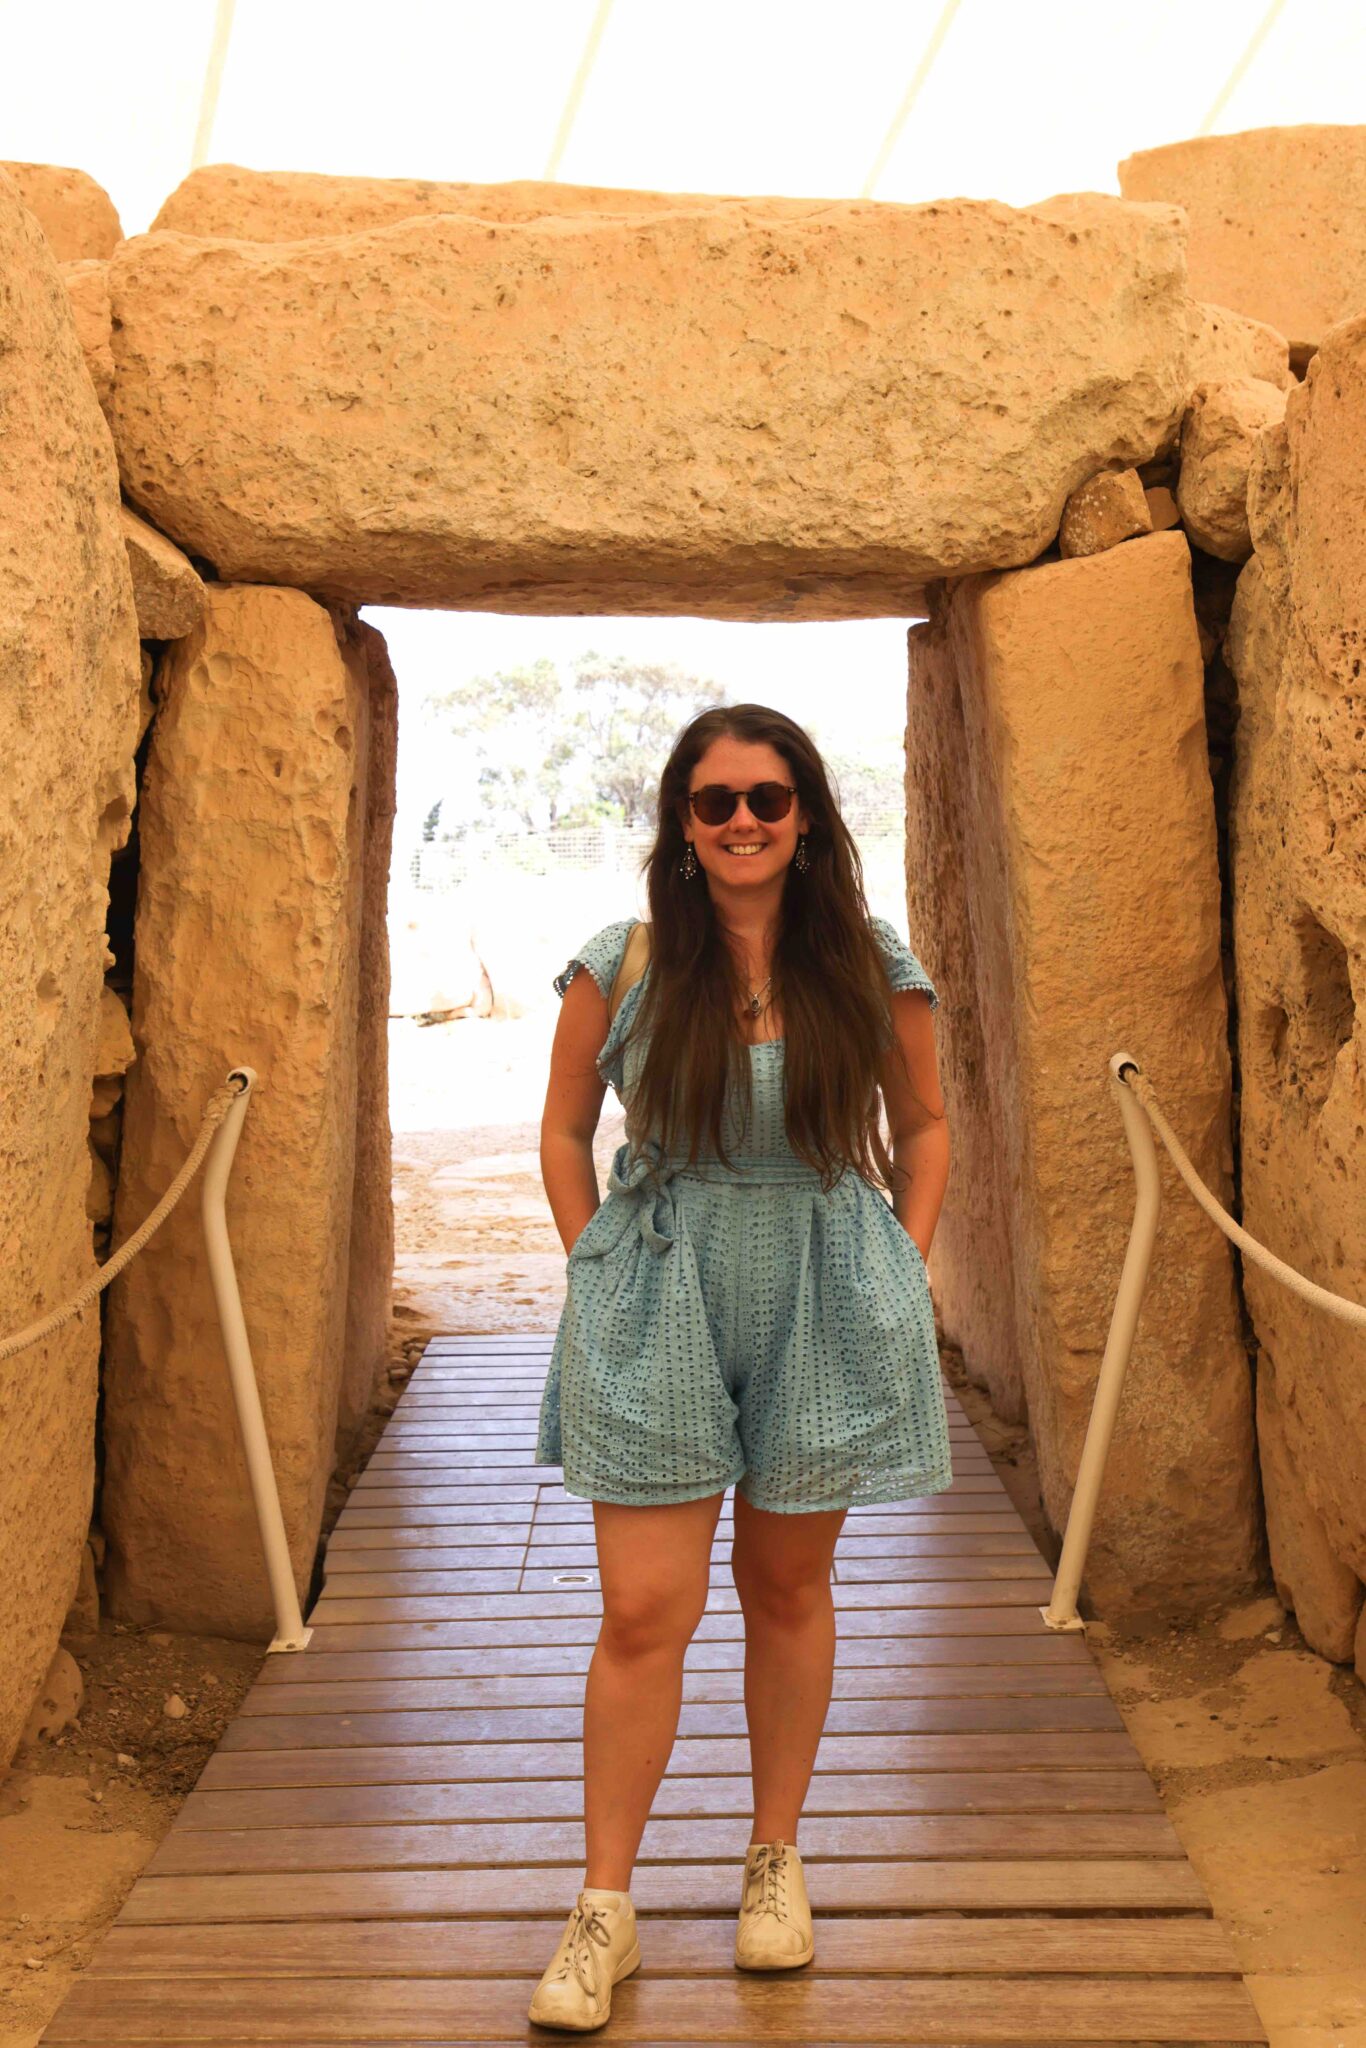 Jade Braham in Malta standing in an ancient temple.